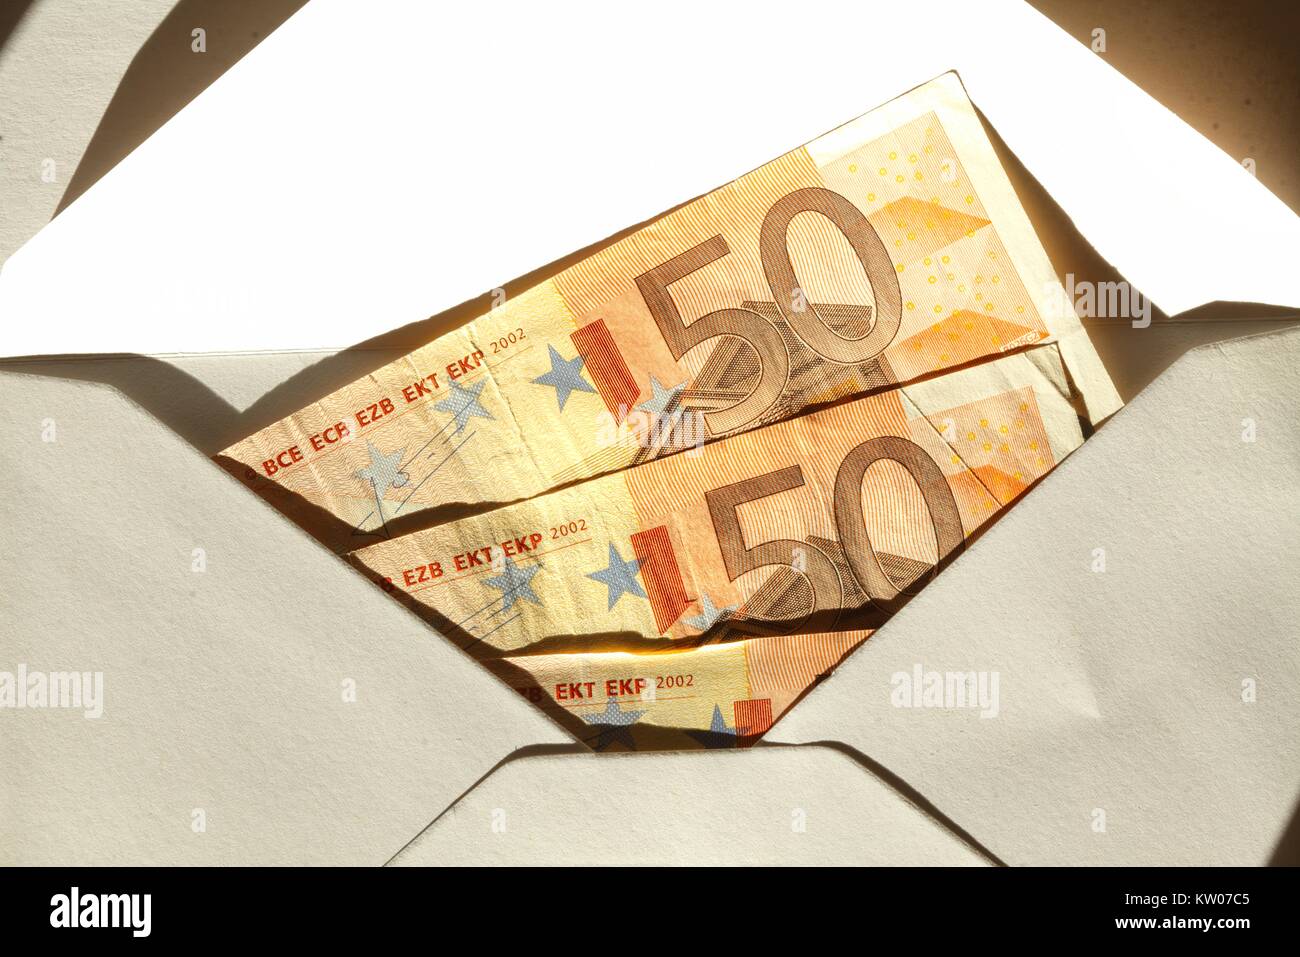 Fifty Euros Banknotes in a envelope as gift of money Stock Photo